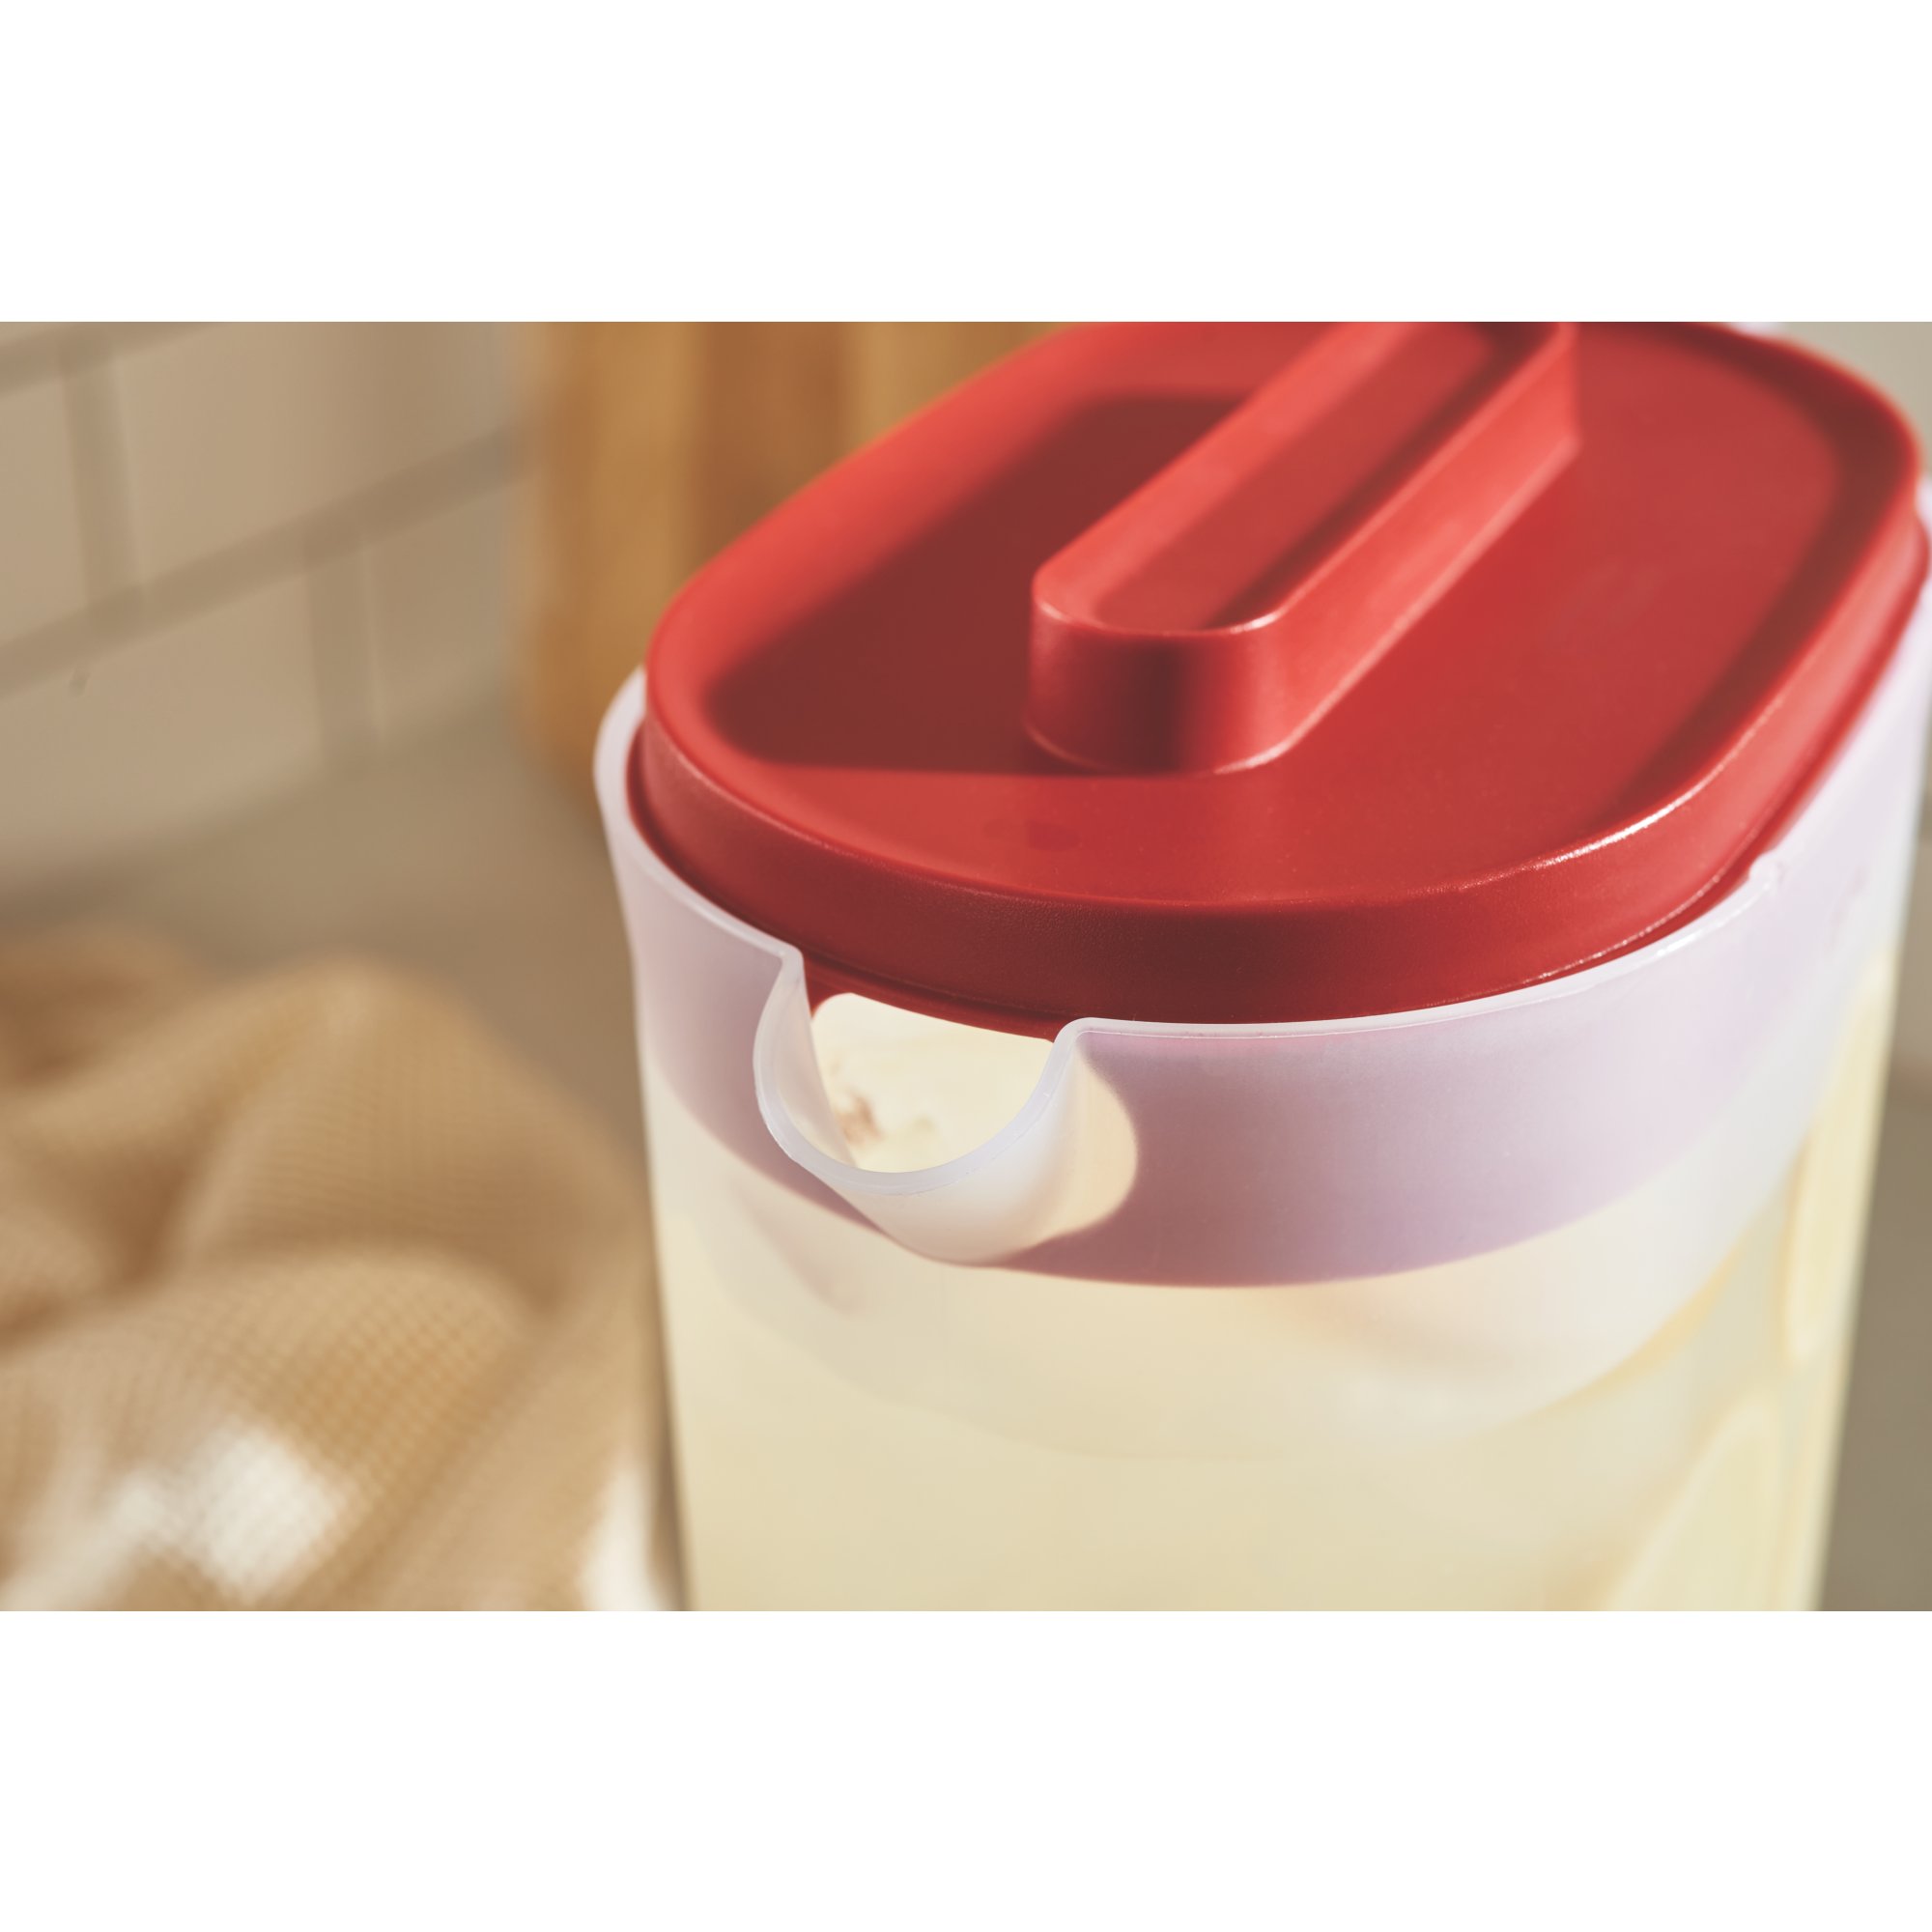 https://s7d9.scene7.com/is/image/NewellRubbermaid/2122602-rubbermaid-food-storage-compact-pitcher-1g-red-kitchen-with-food-lifestyle-4?wid=2000&hei=2000